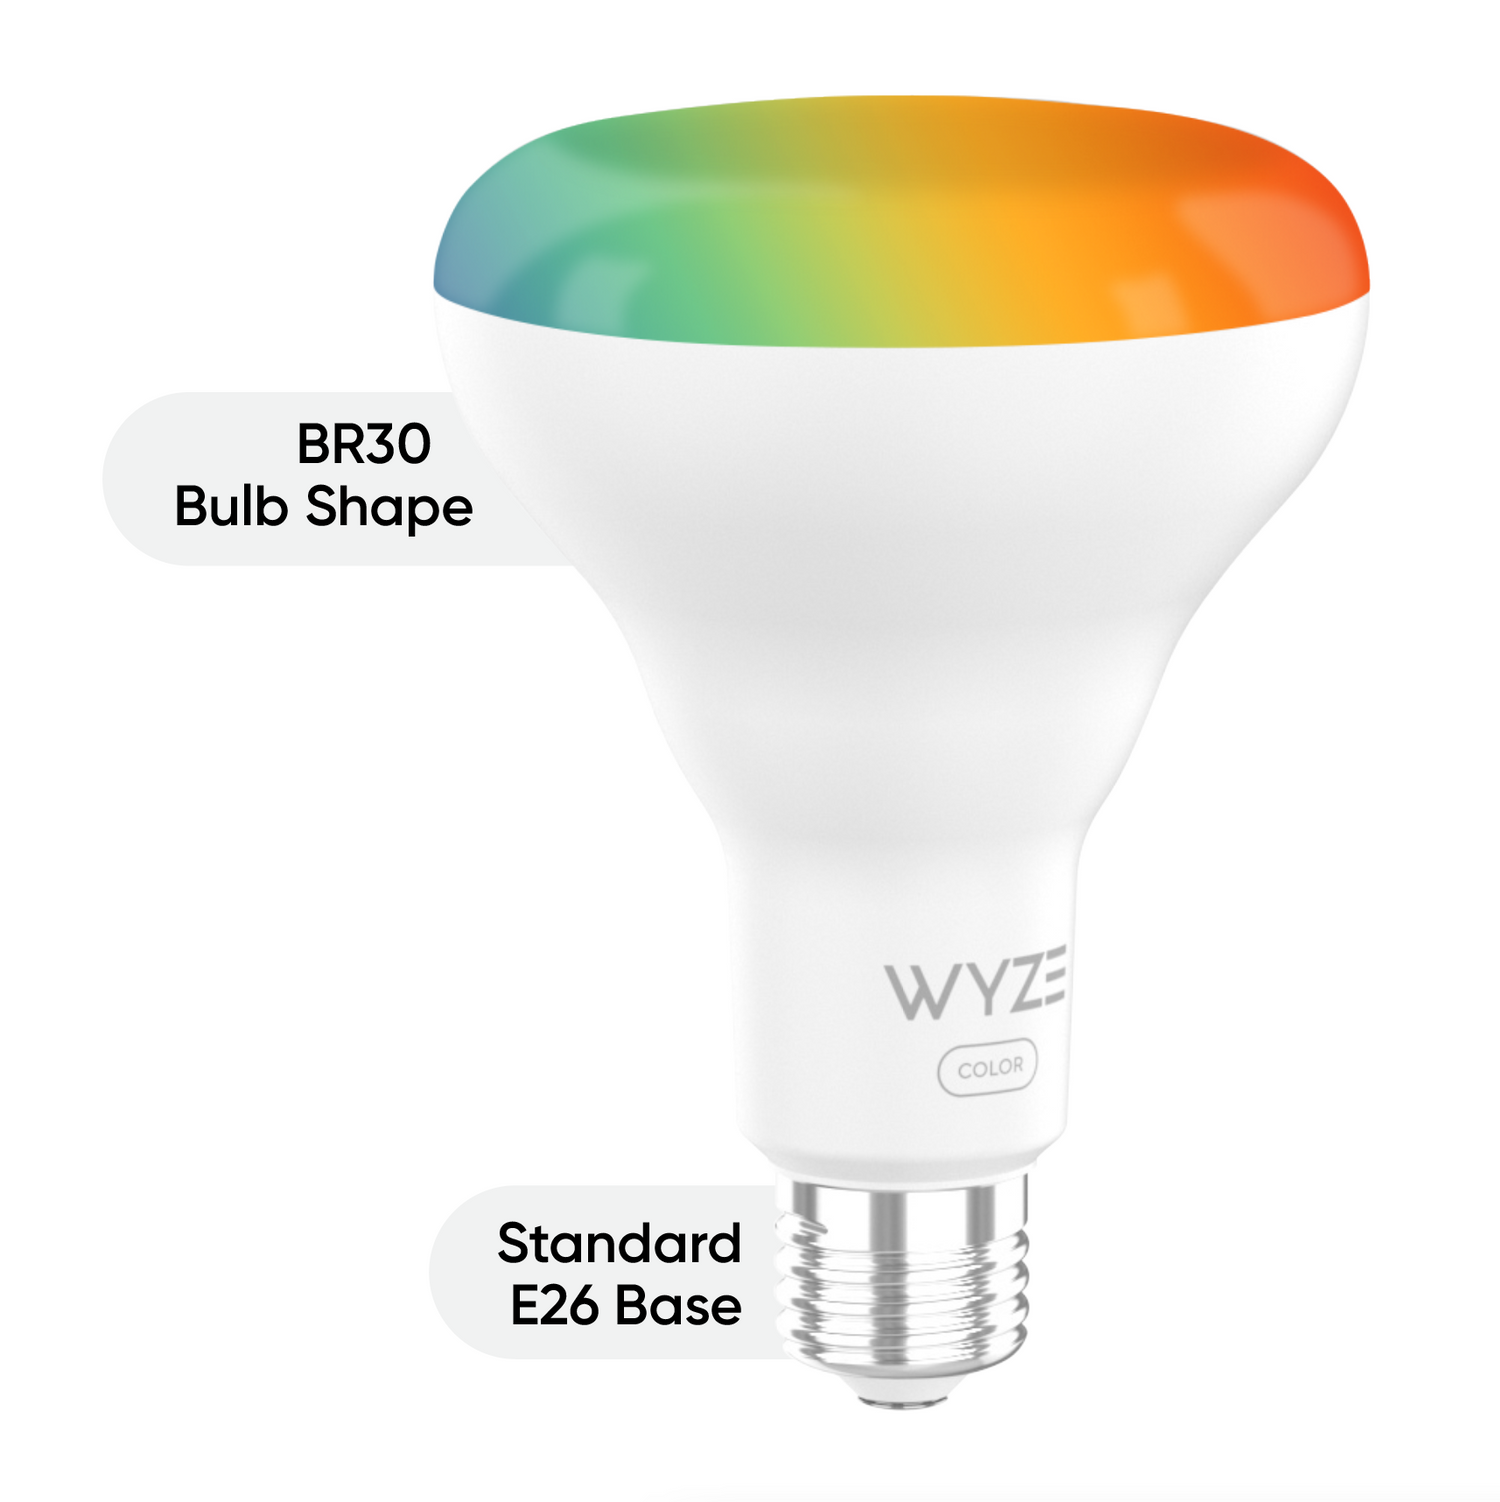 Color smart bulb with text overlay calling out the BR30 bulb shape and E26 base.